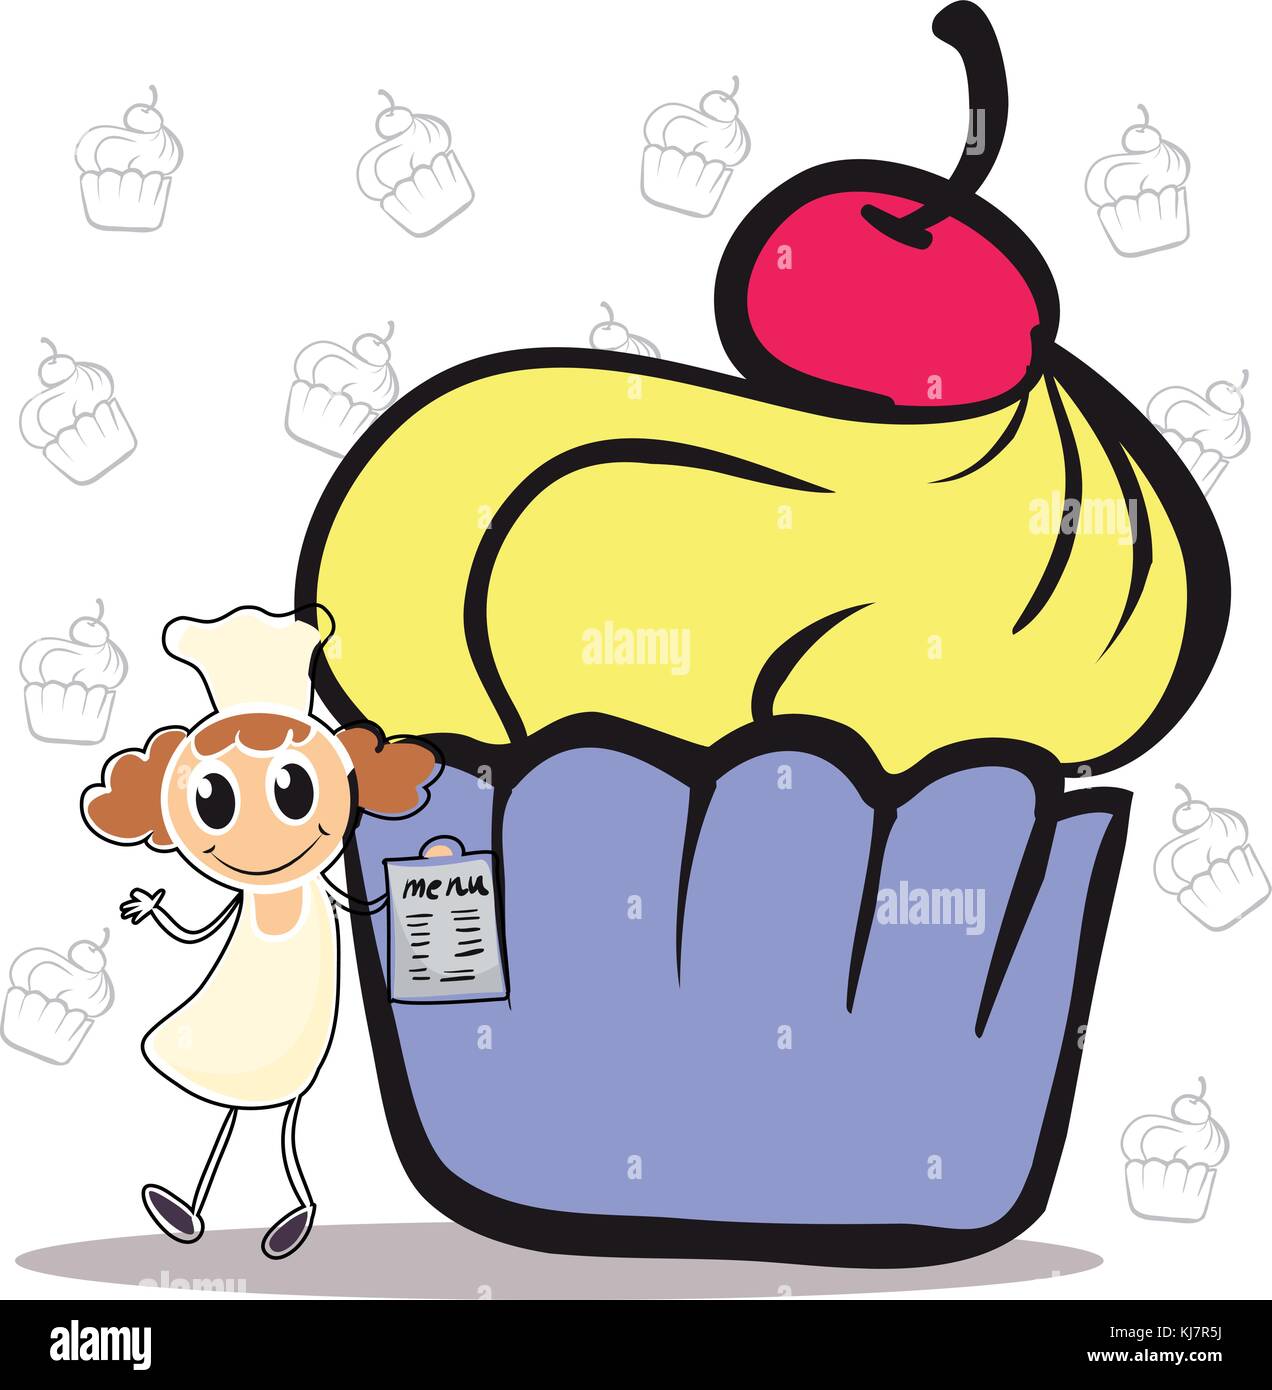 Illustration of a chef holding a menu beside a giant cupcake on a white background Stock Vector